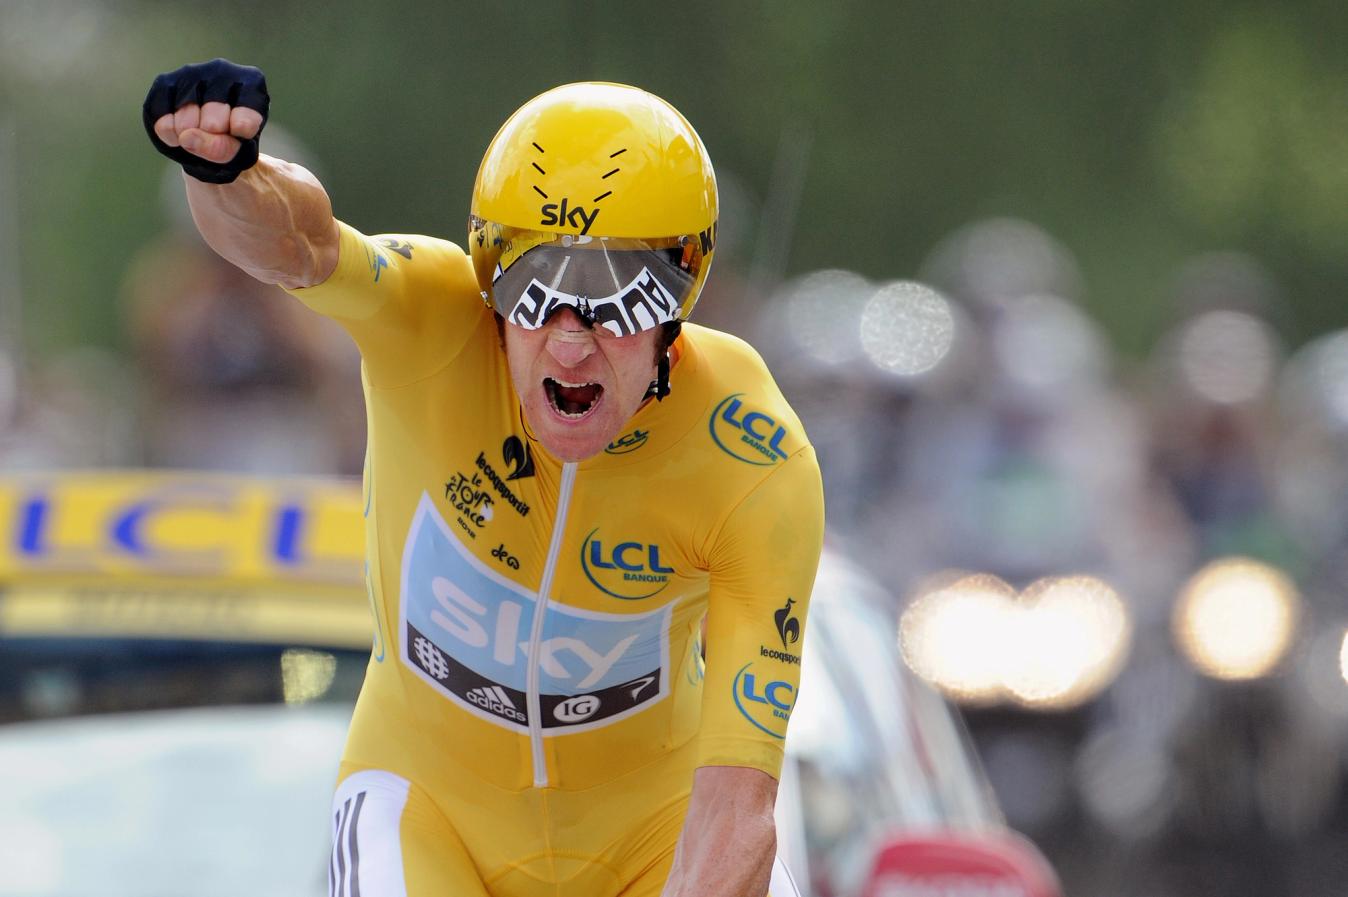 Sir Bradley Wiggins fulfilled Dave Brailsford's promise with his commanding victory in the 2012 Tour de France, a moment that many thought may never come